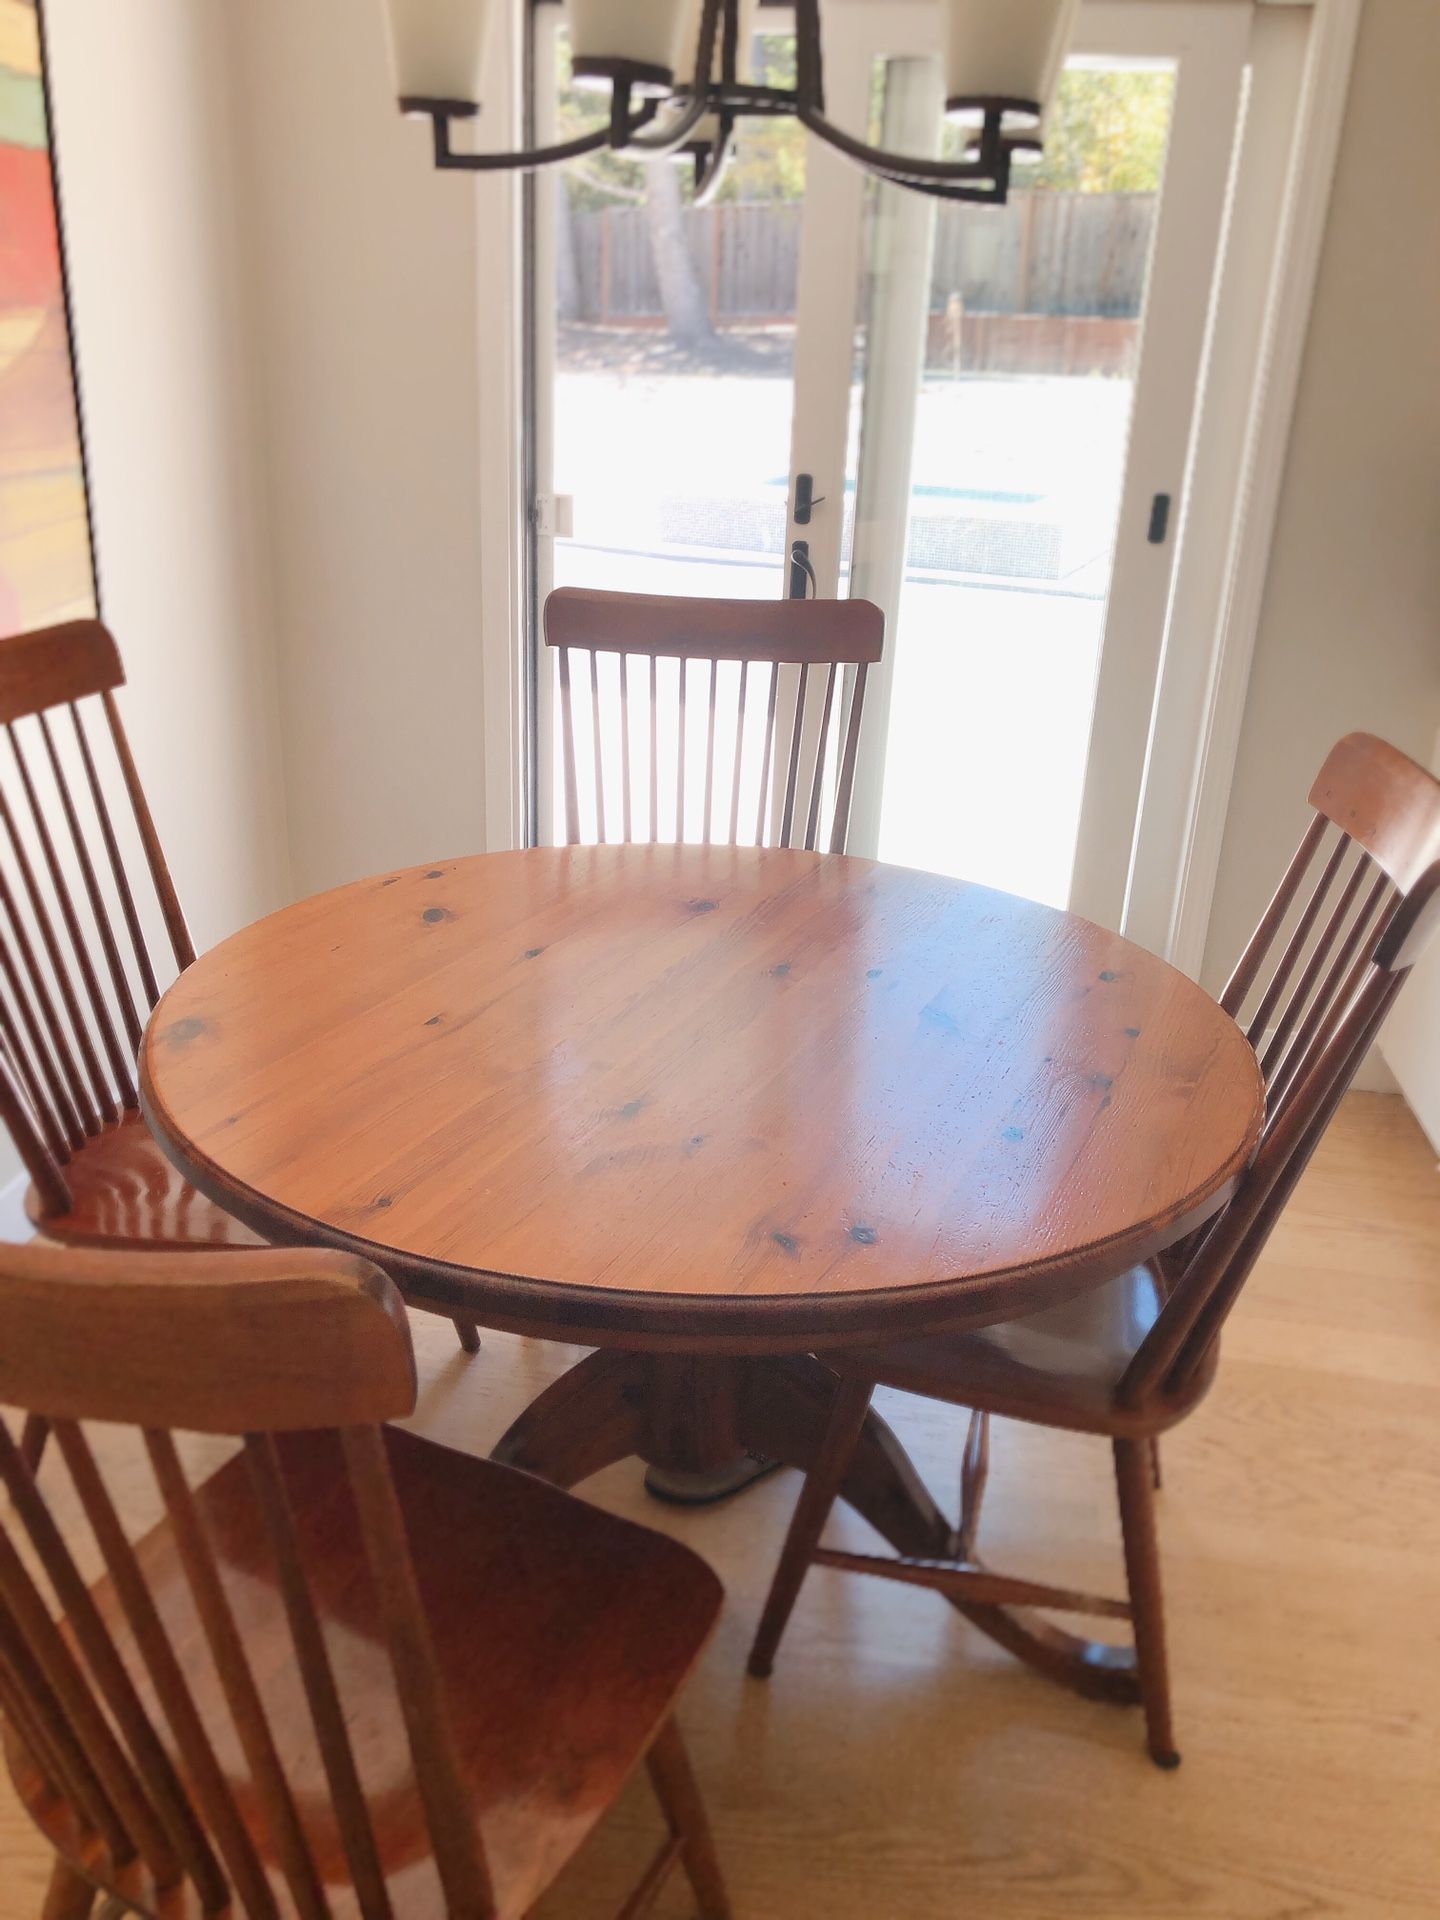 Wooden Kitchen Table and Chairs